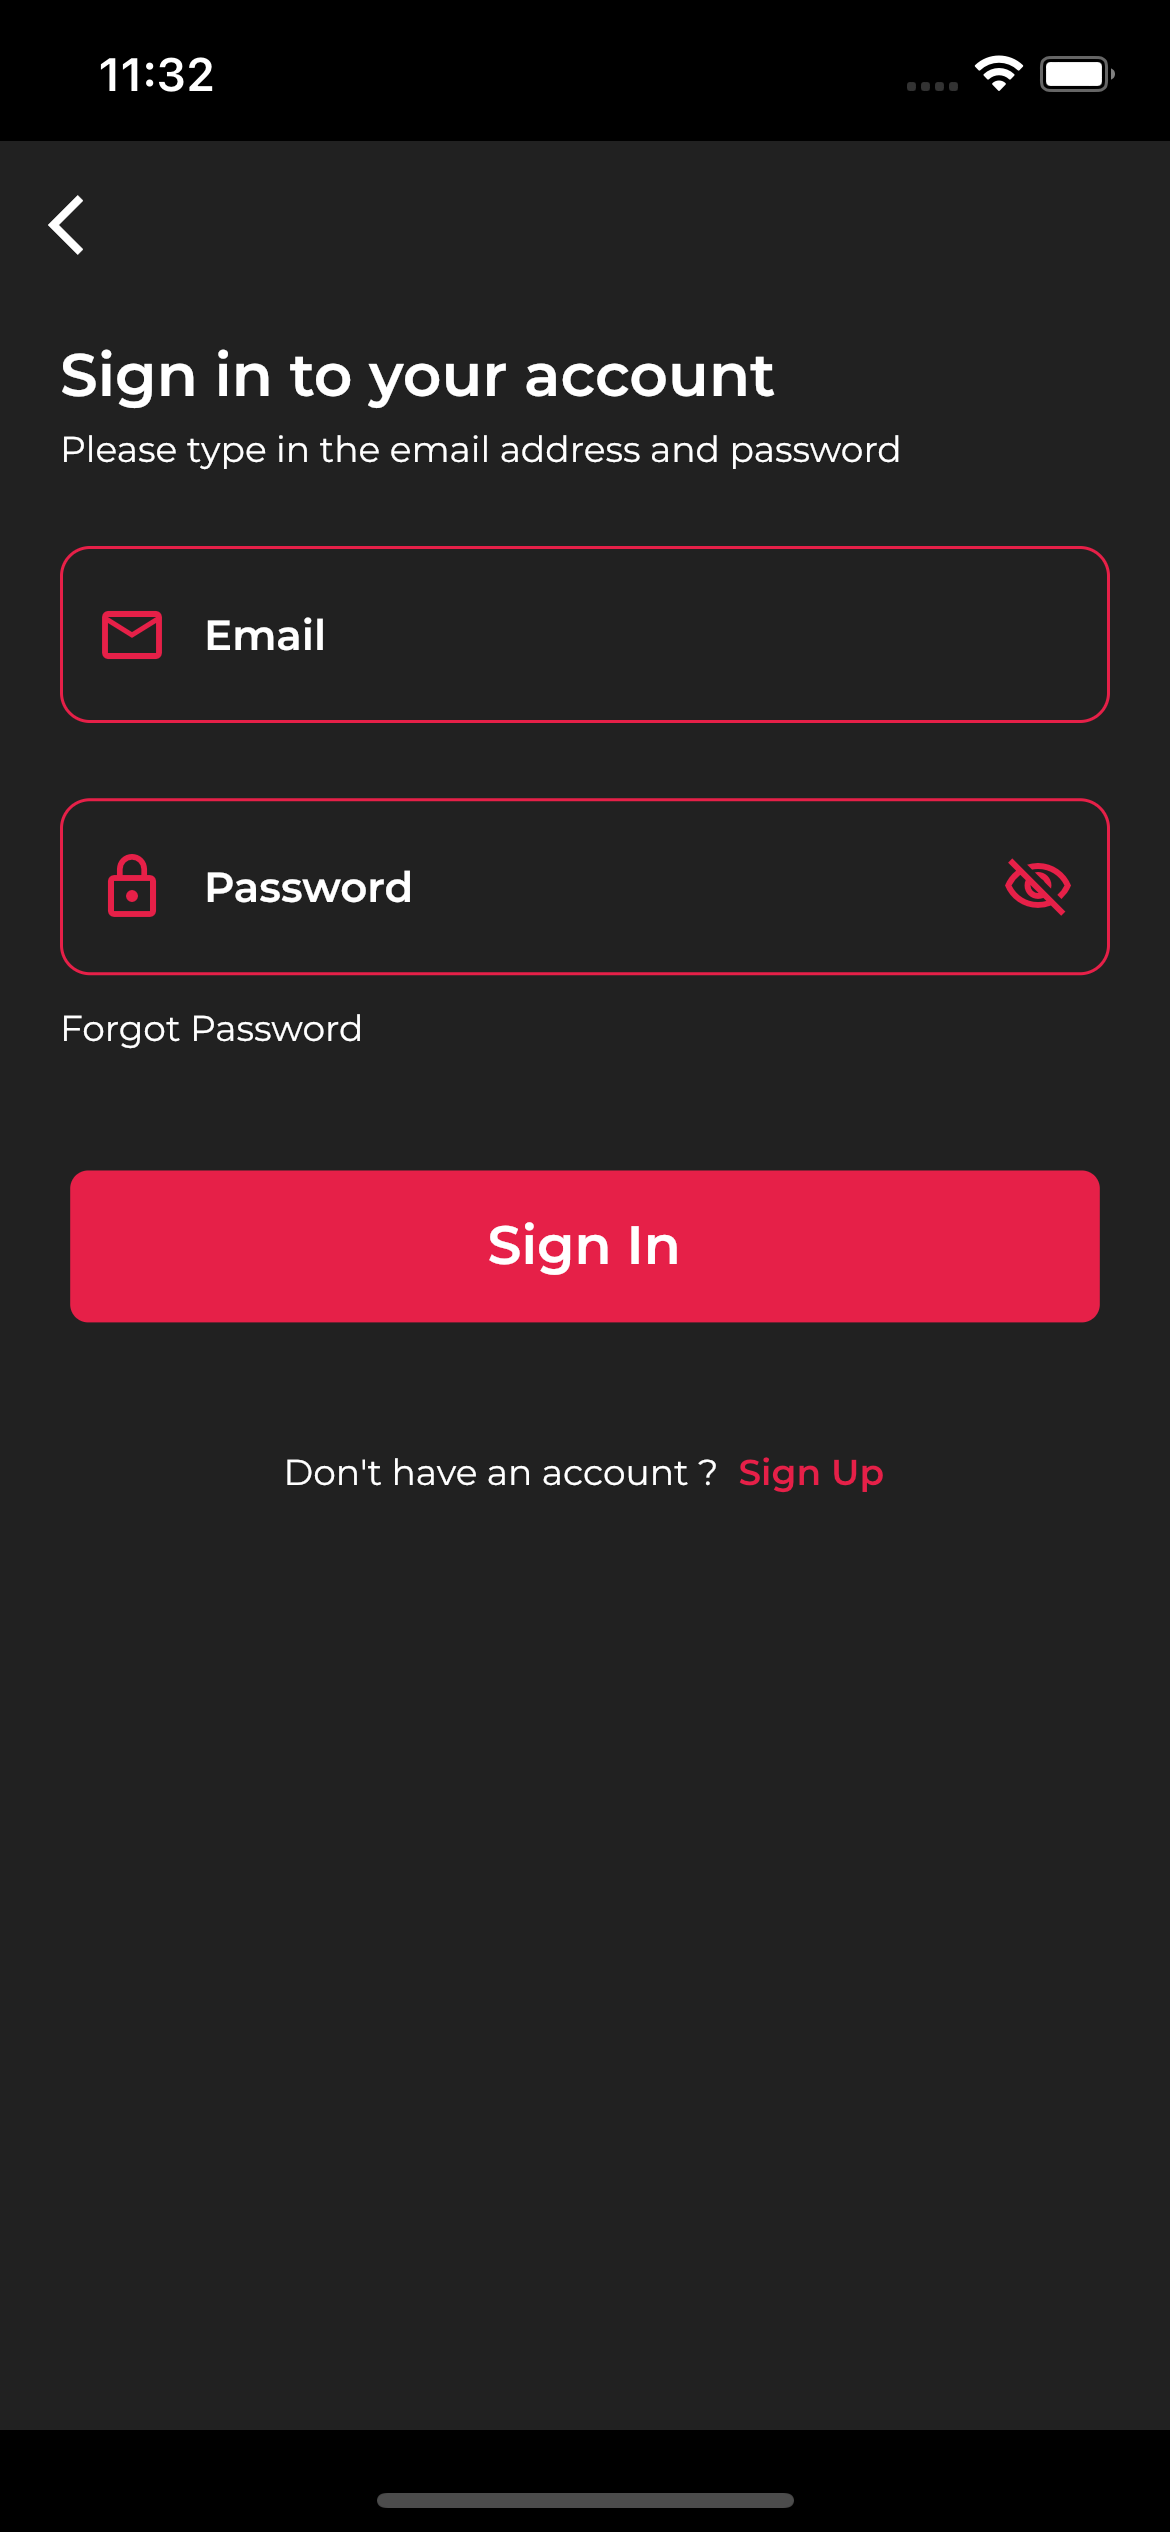 11:32 =

&lt;

Sign in to your account

Please type in the email address and password

Q Password D

Forgot Password

Don't have an account? Sign Up